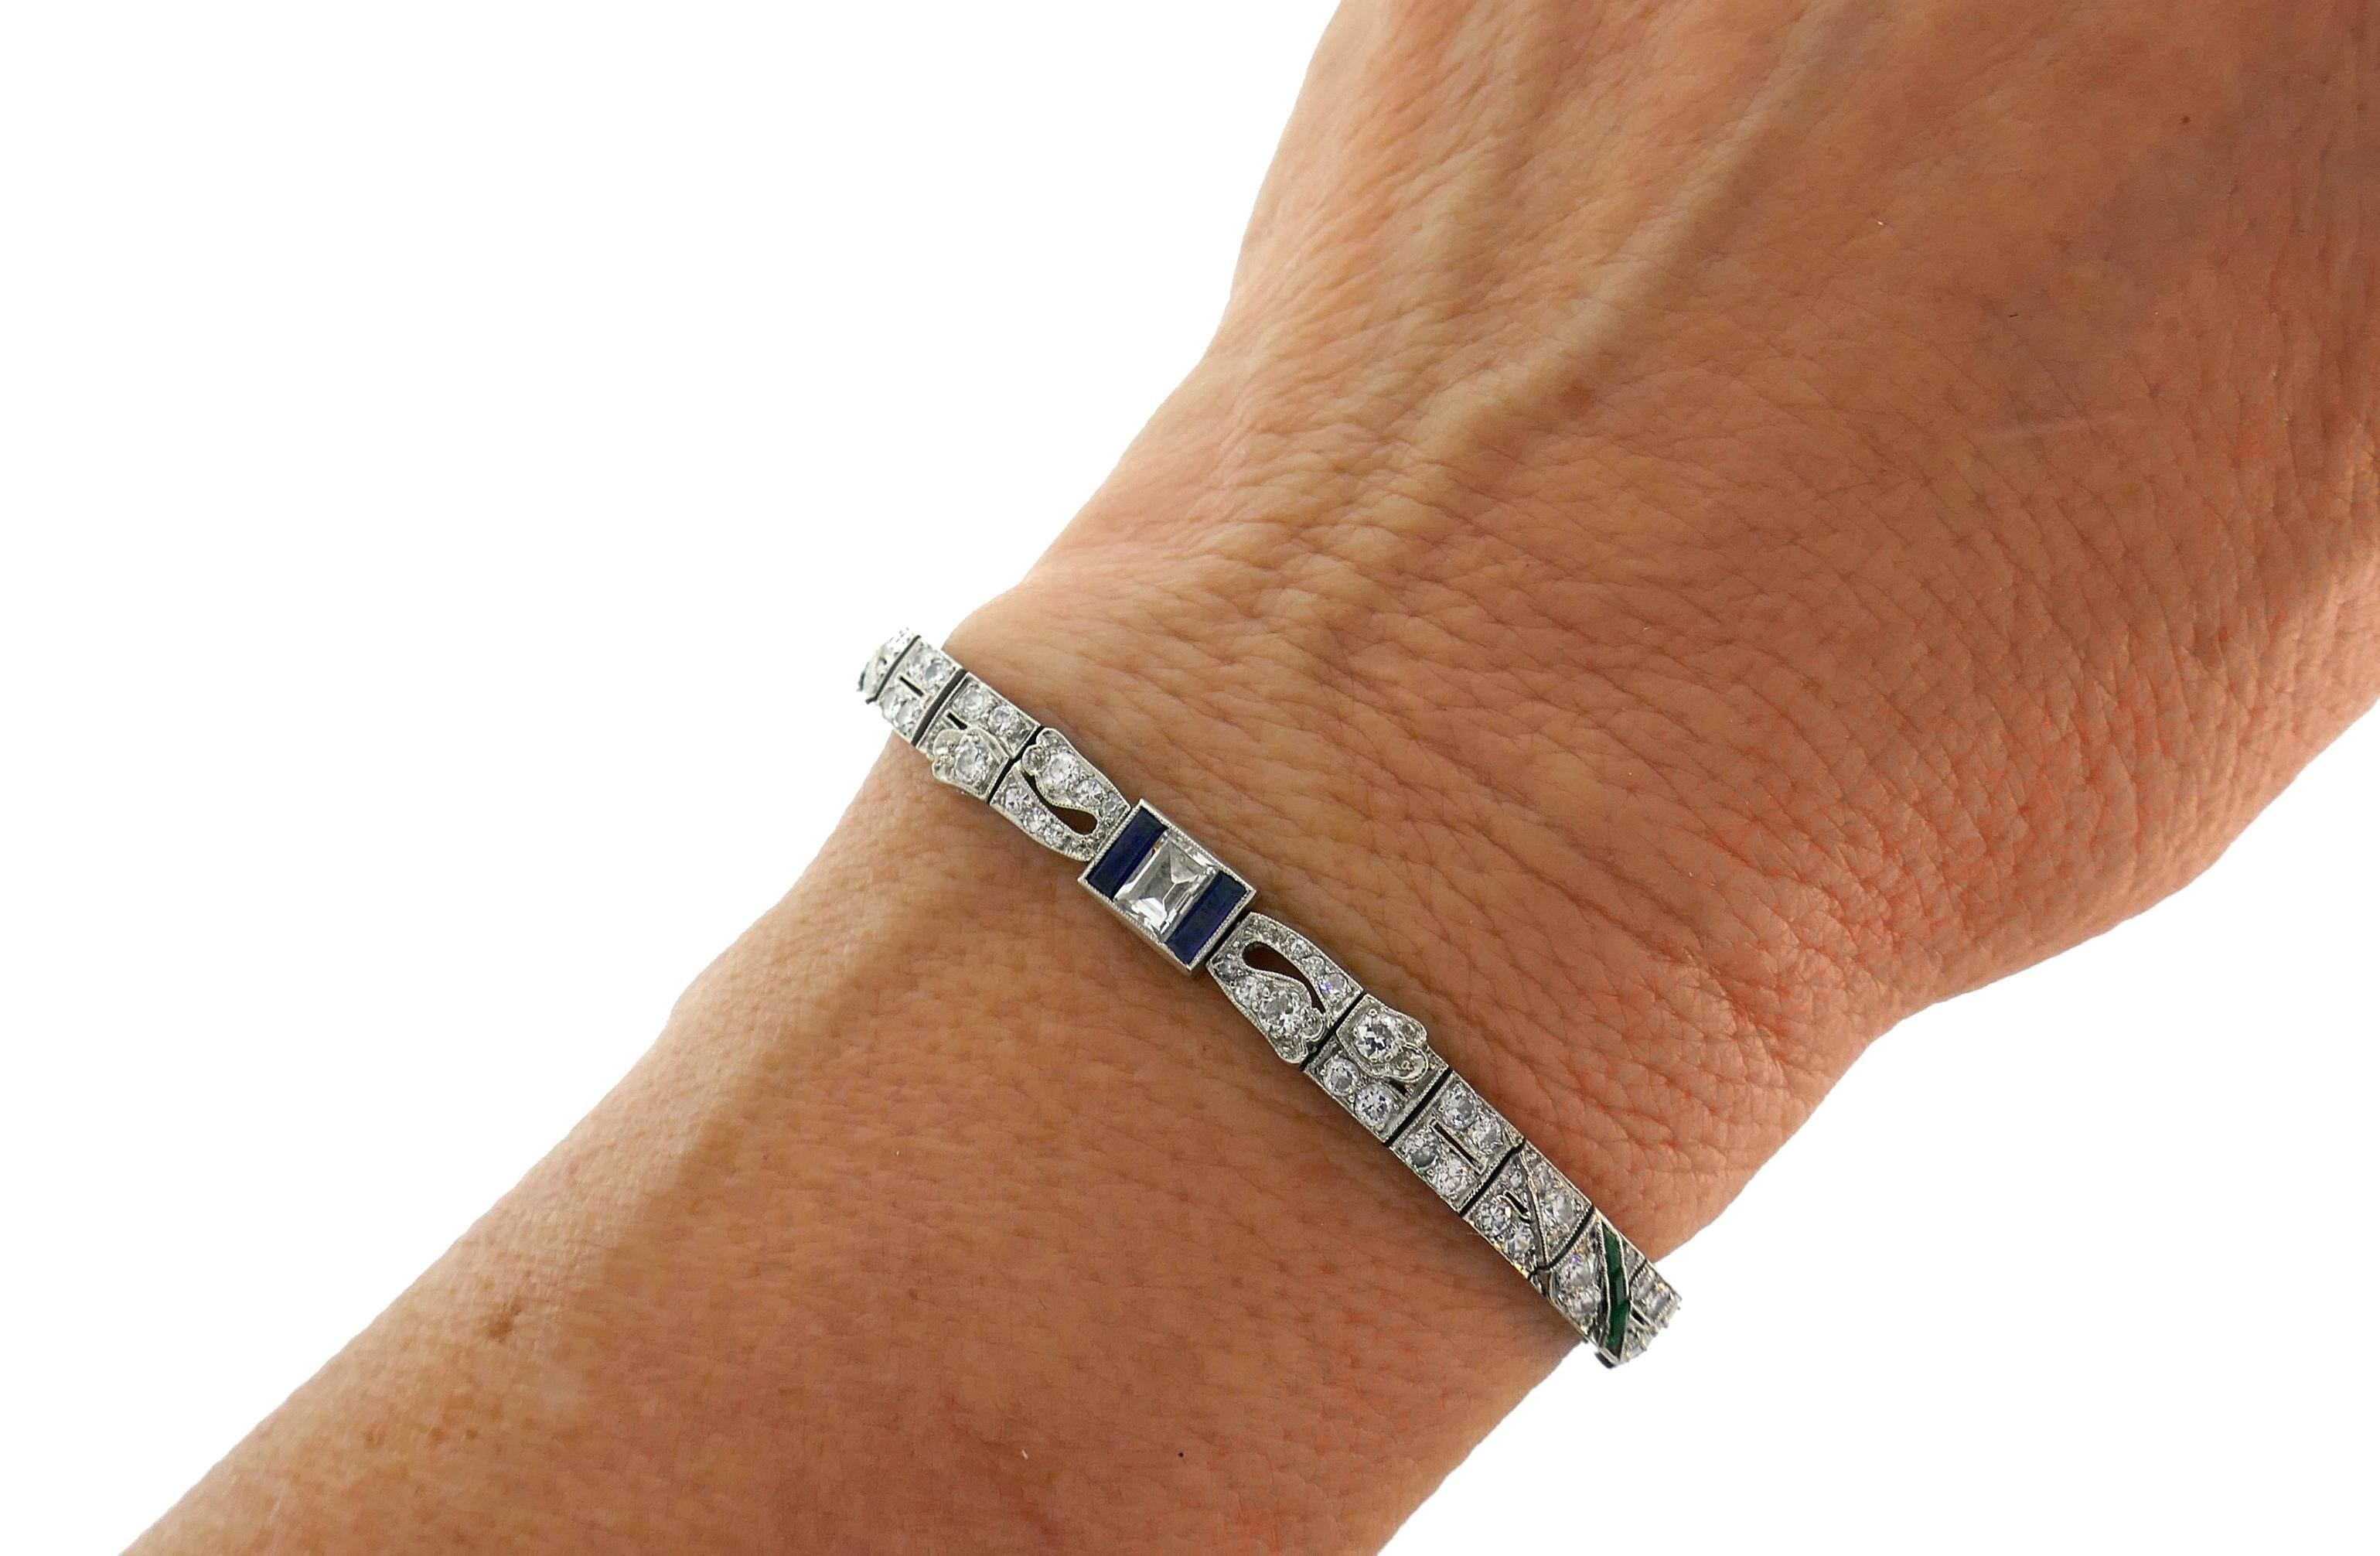 A delicate Art Deco bracelet created in the 1930s.  
The bracelet is made of platinum, step cut (1.50 carats total), Old European and single cut diamonds (4 carats total, I-J color, VS clarity) accented with baguette cut sapphire (0.60 carat total)